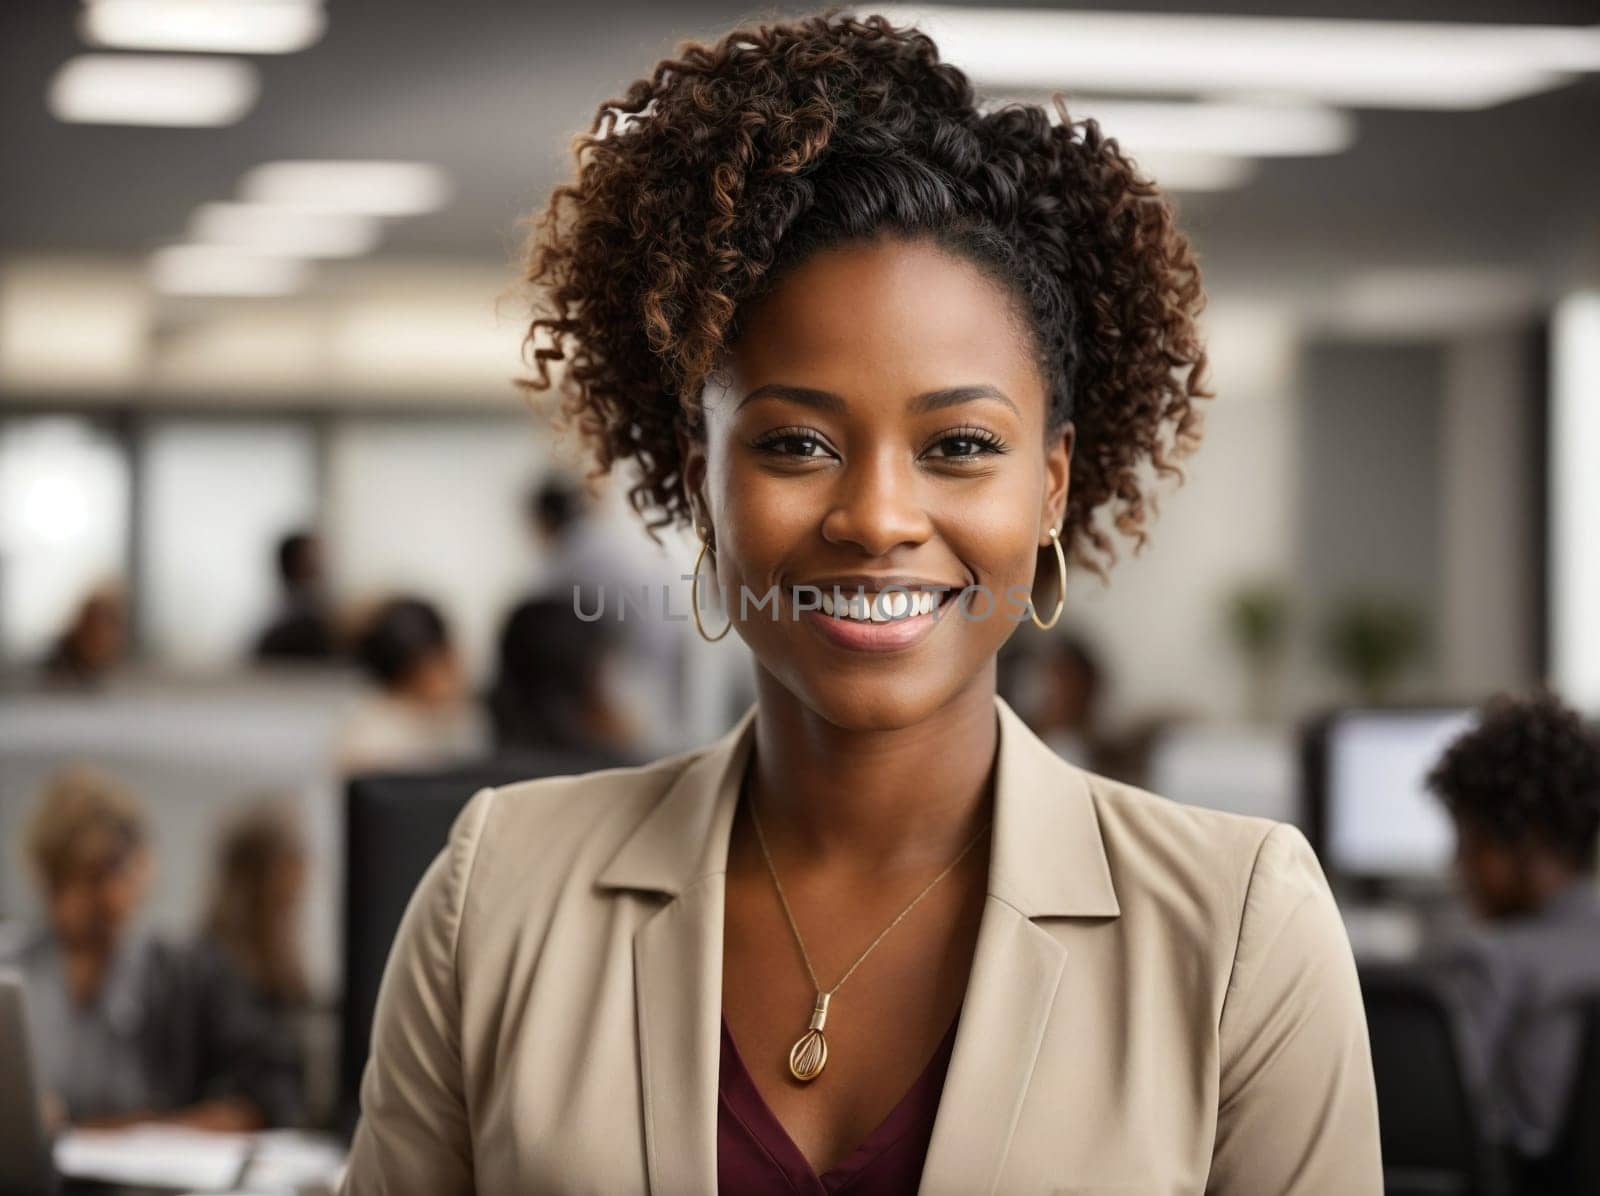 An image of a woman smiling brightly amidst a professional office setup, radiating positivity and warmth.